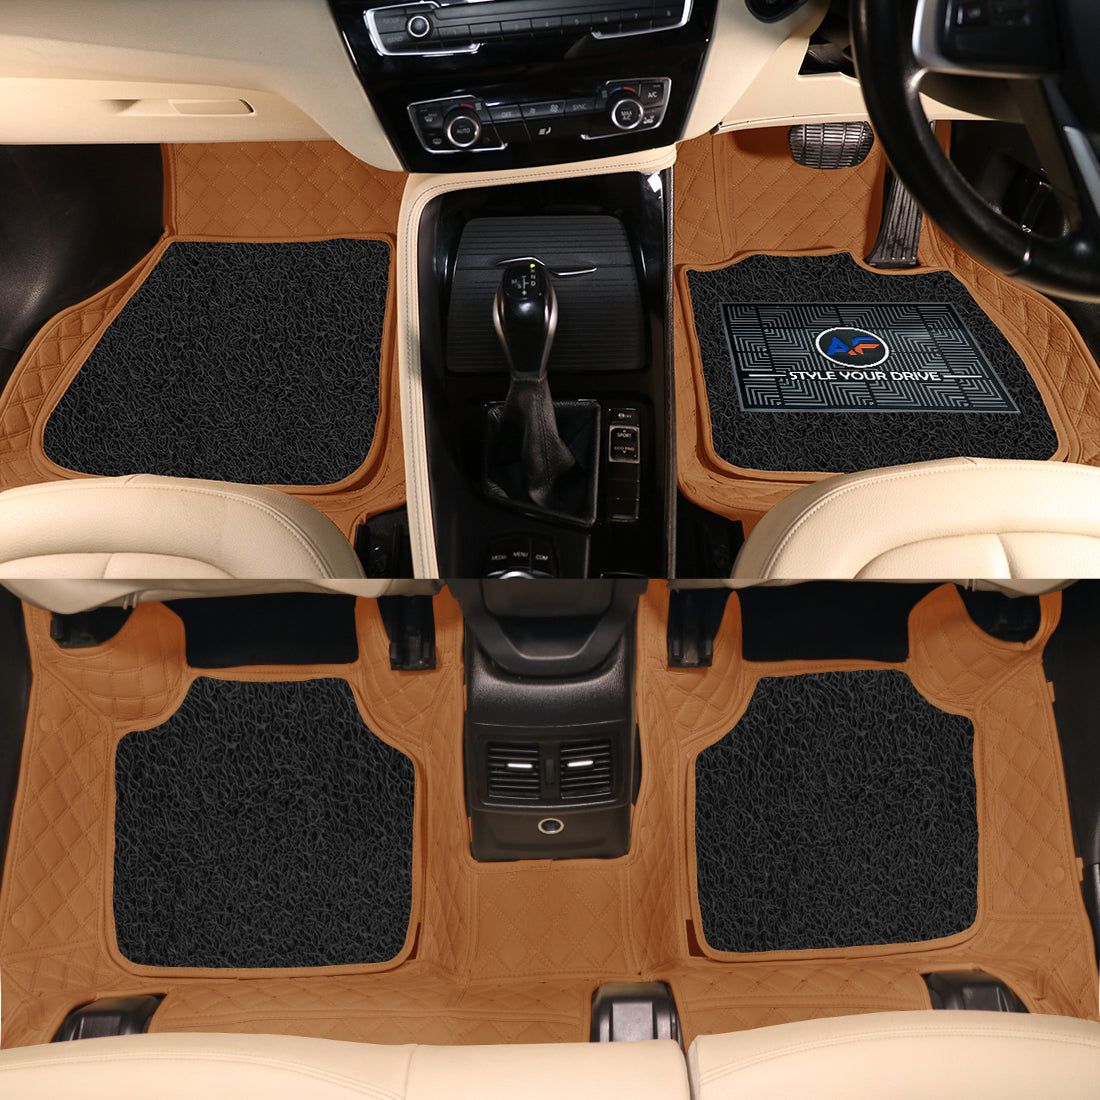 BMW X3 2014-177D Luxury Car Mat, All Weather Proof, Anti-Skid, 100% Waterproof & Odorless with Unique Diamond Fish Design (24mm Luxury PU Leather, 2 Rows)